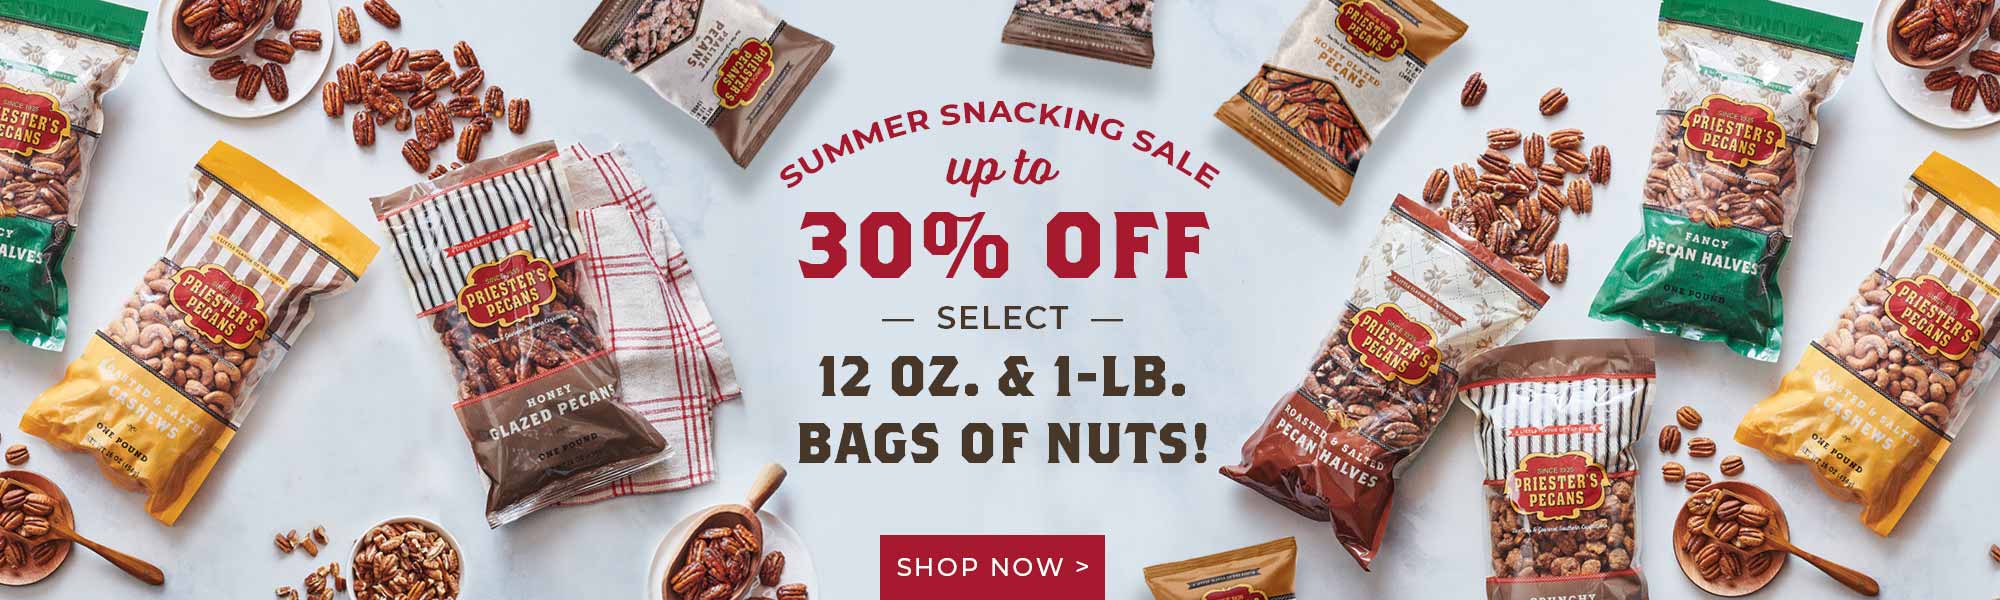 Up to 30% OFF select Pecan Bags